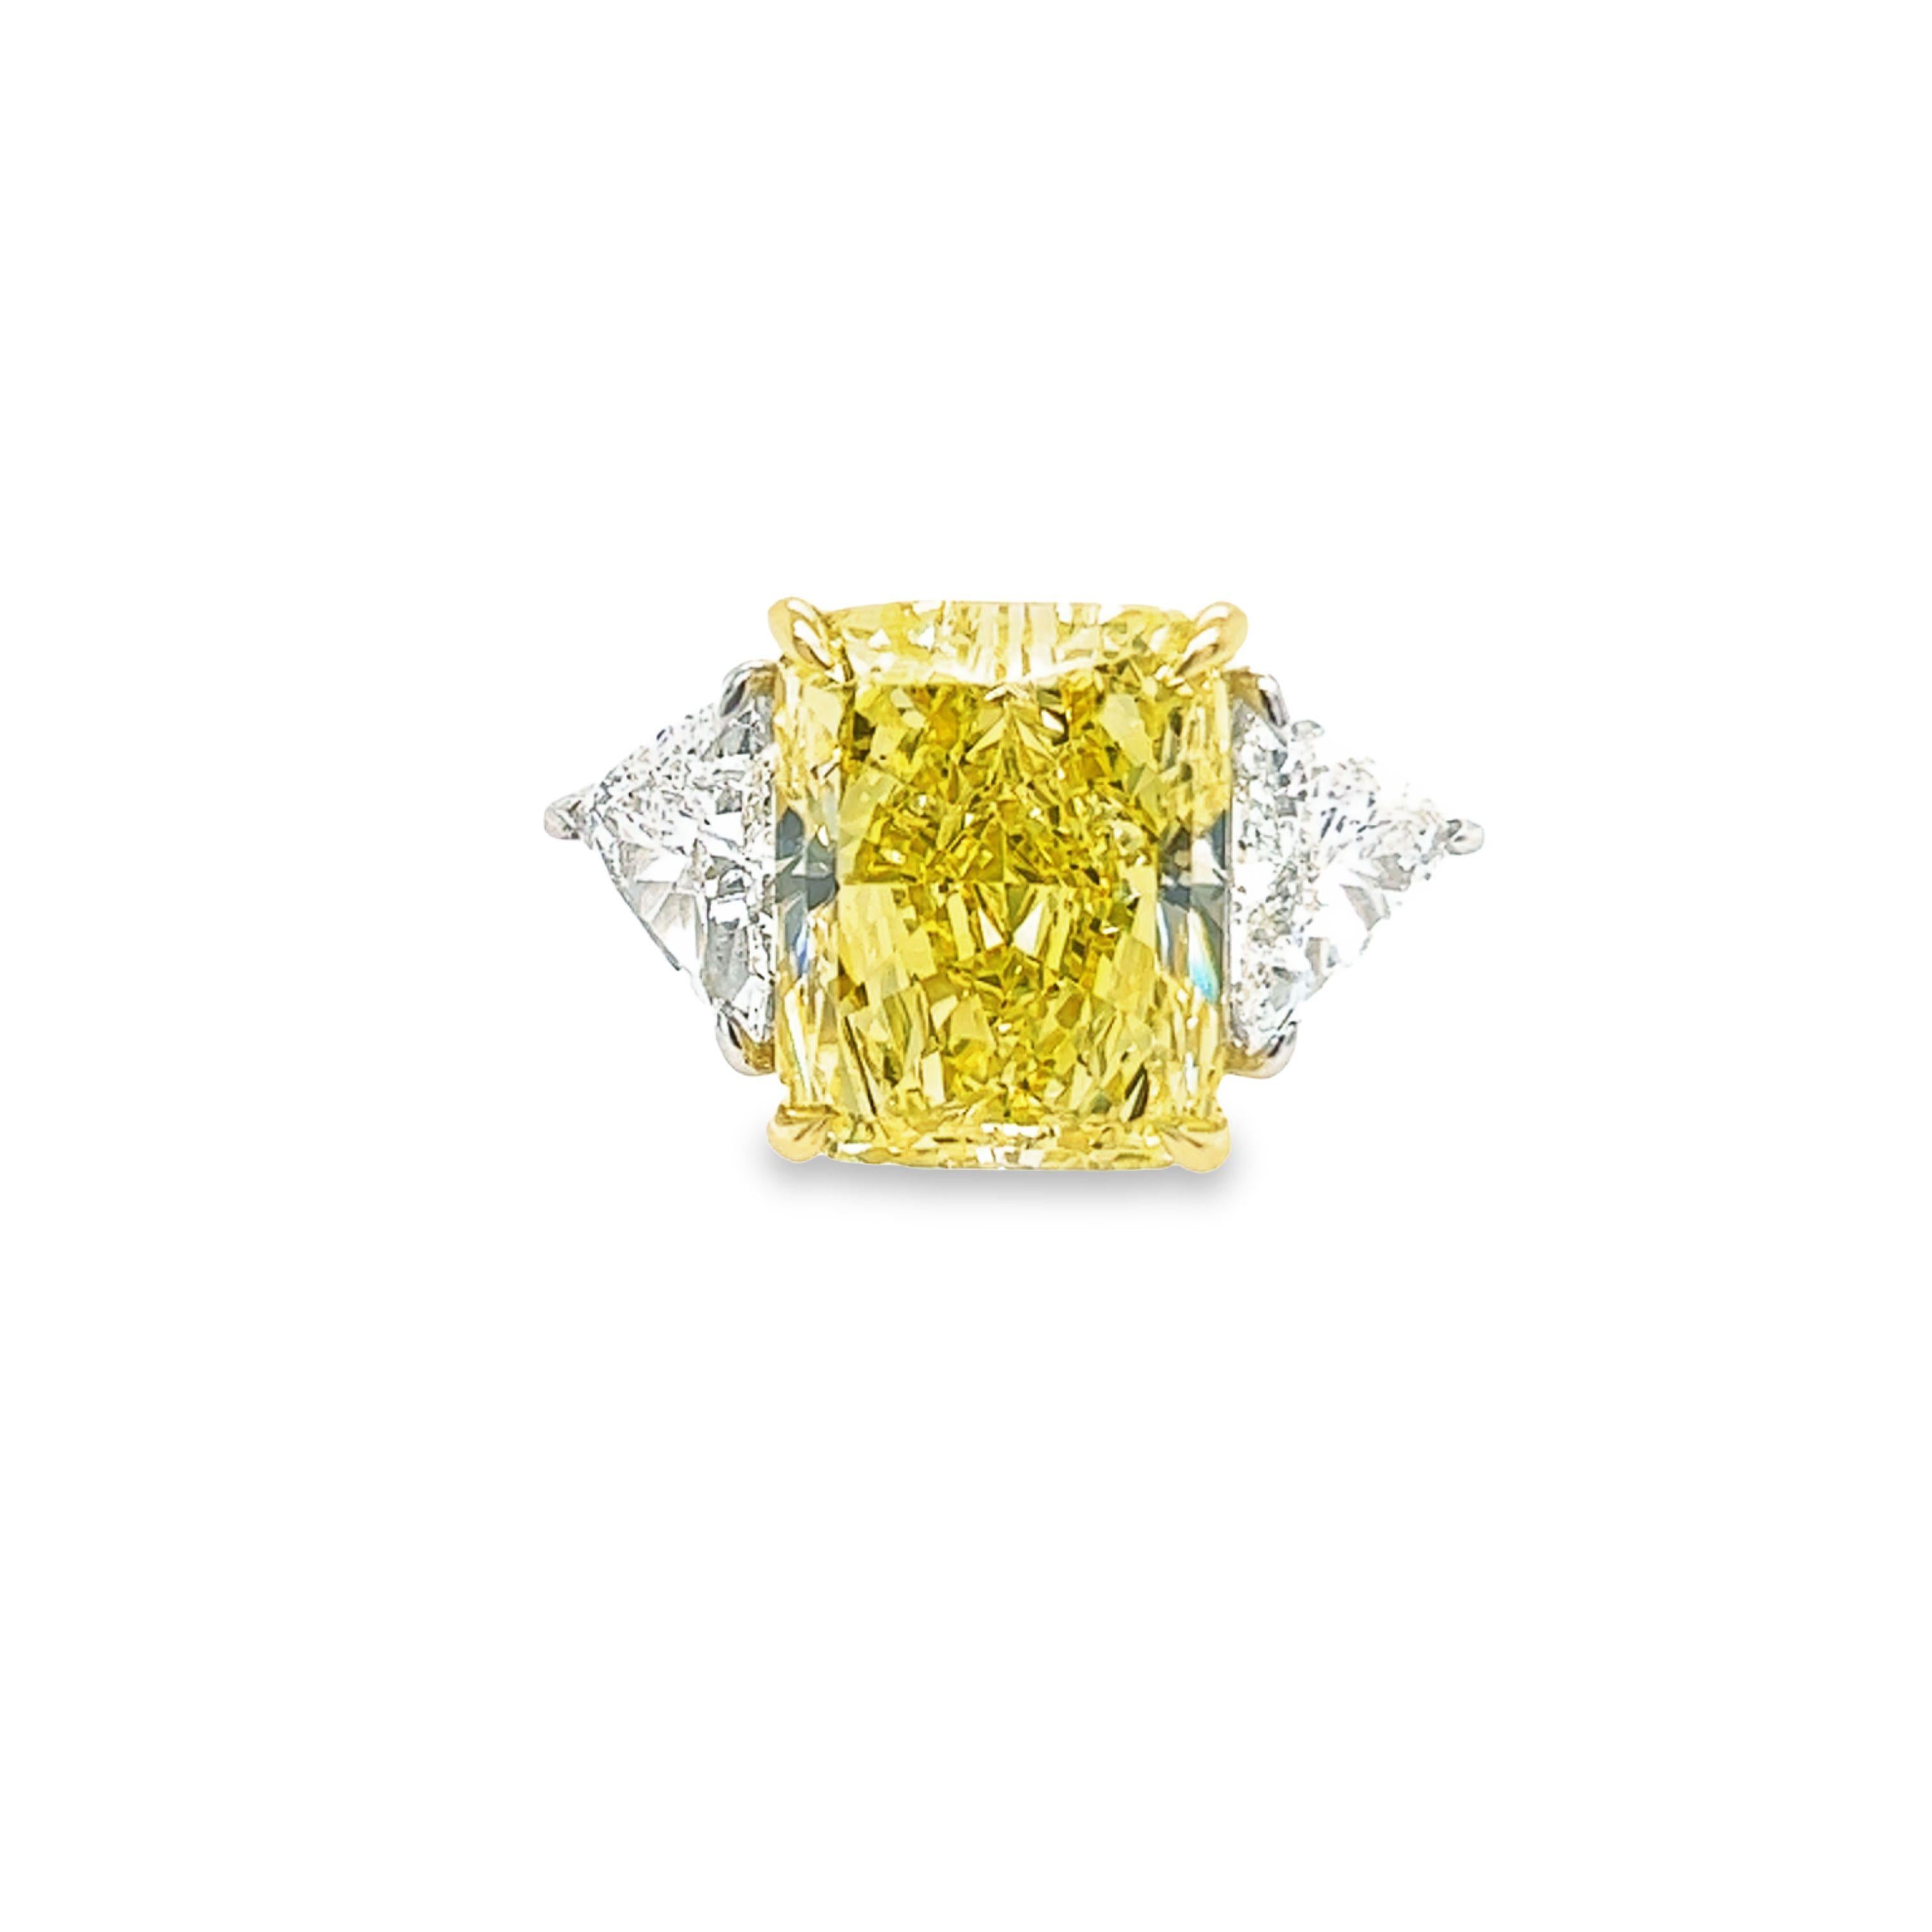 Rosenberg Diamonds & Co. 12.15 carat Radiant Cut Fancy Intense Yellow VS1 clarity is accompanied by a GIA certificate. This exquisite radiant cut is set in a handmade platinum & 18k yellow gold setting with perfectly matched pair of step cut